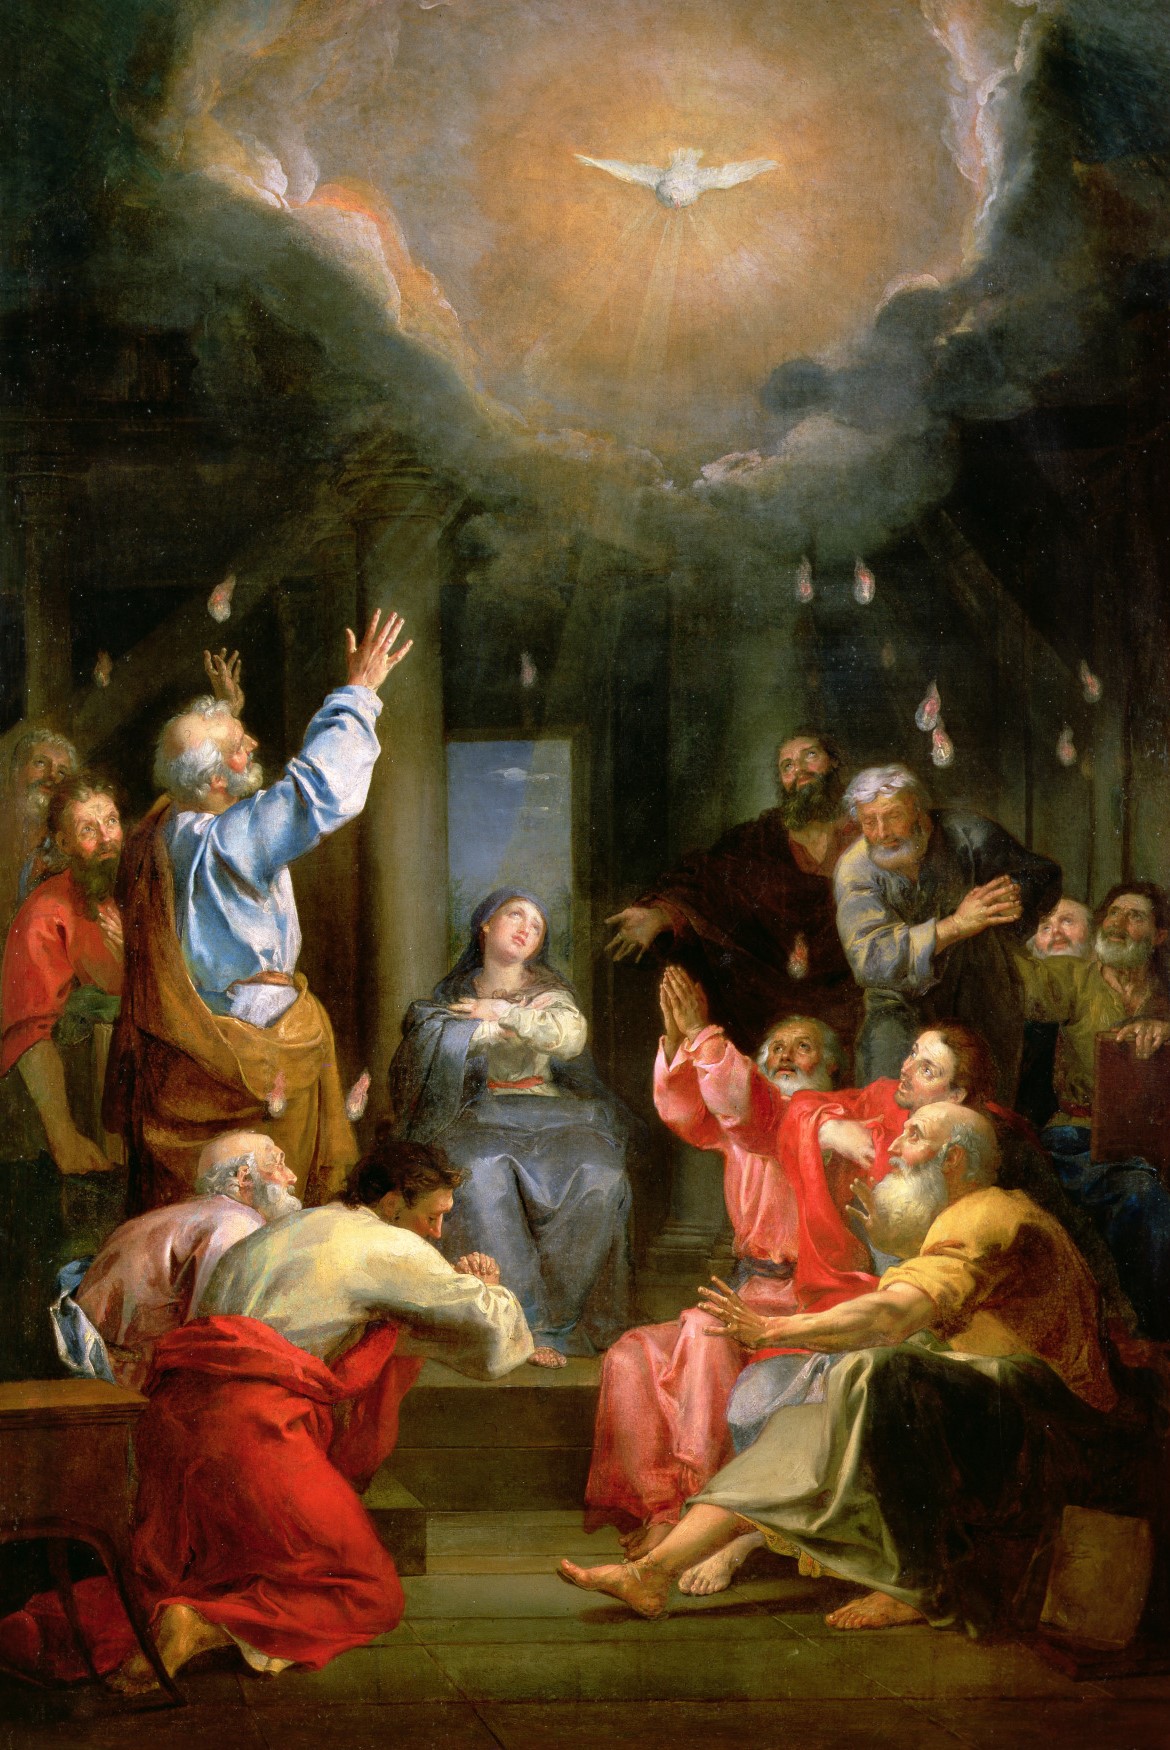 Mary in the Acts of the Apostles